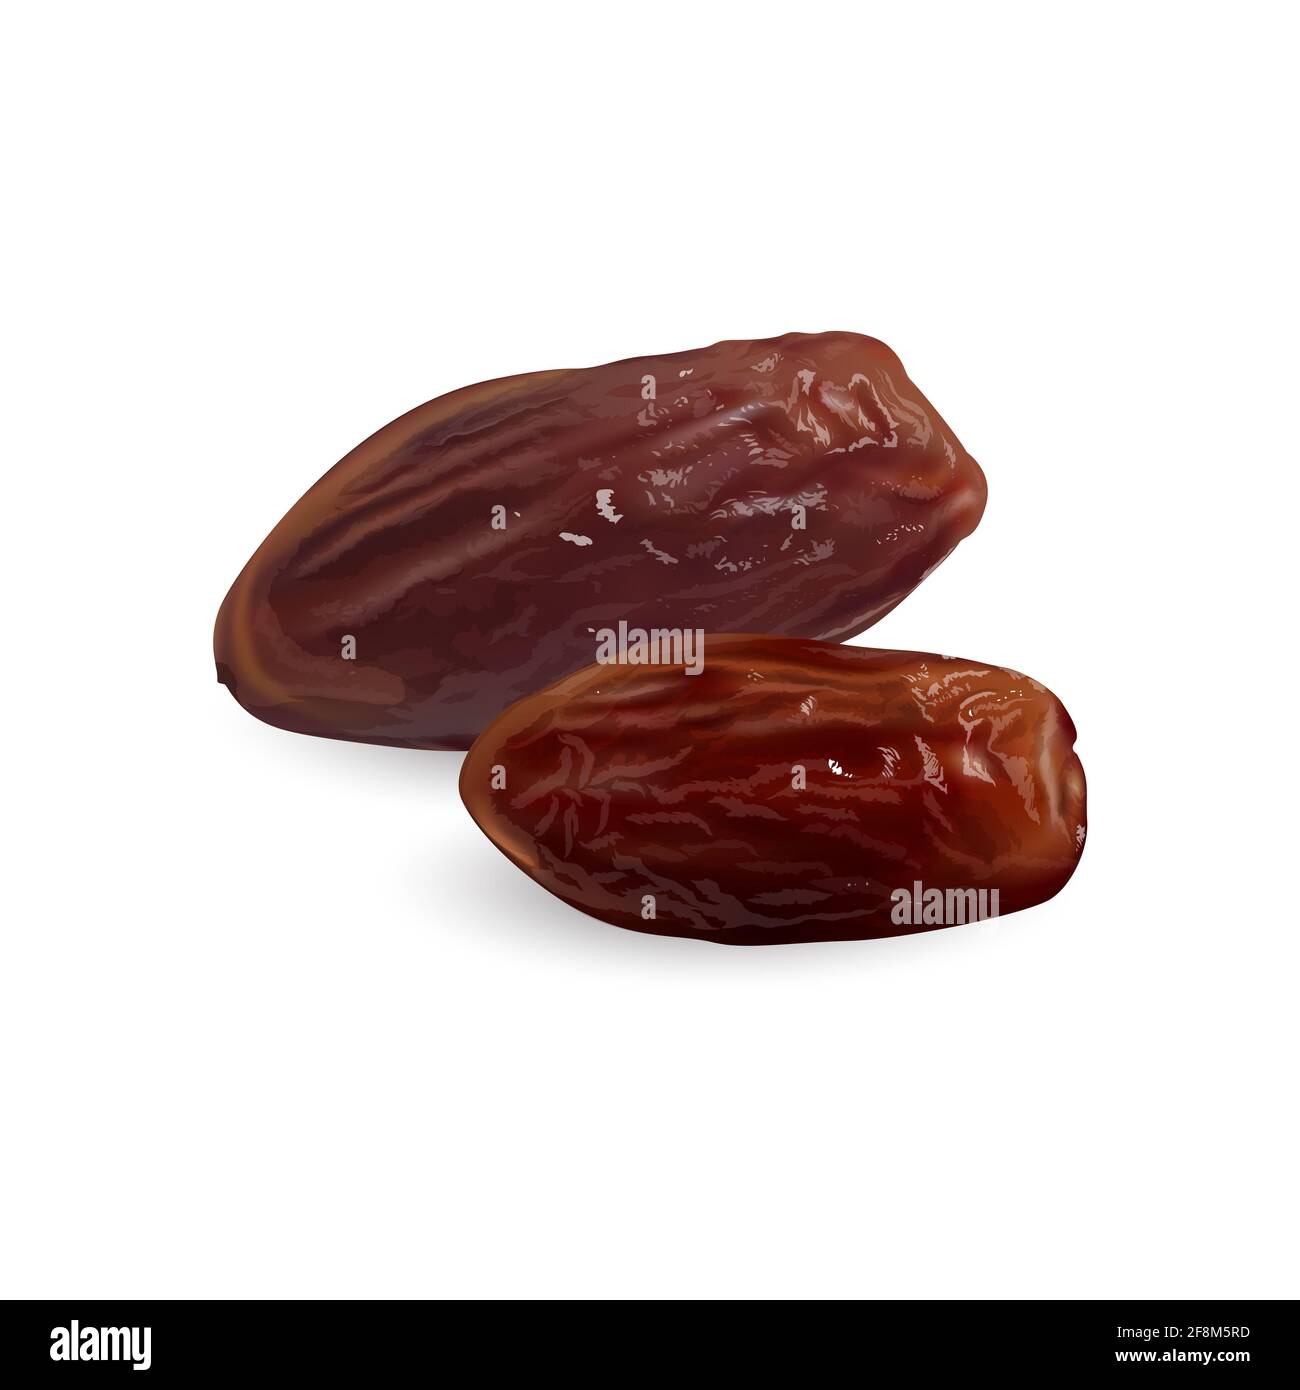 Two dried dates on a white background. Stock Photo